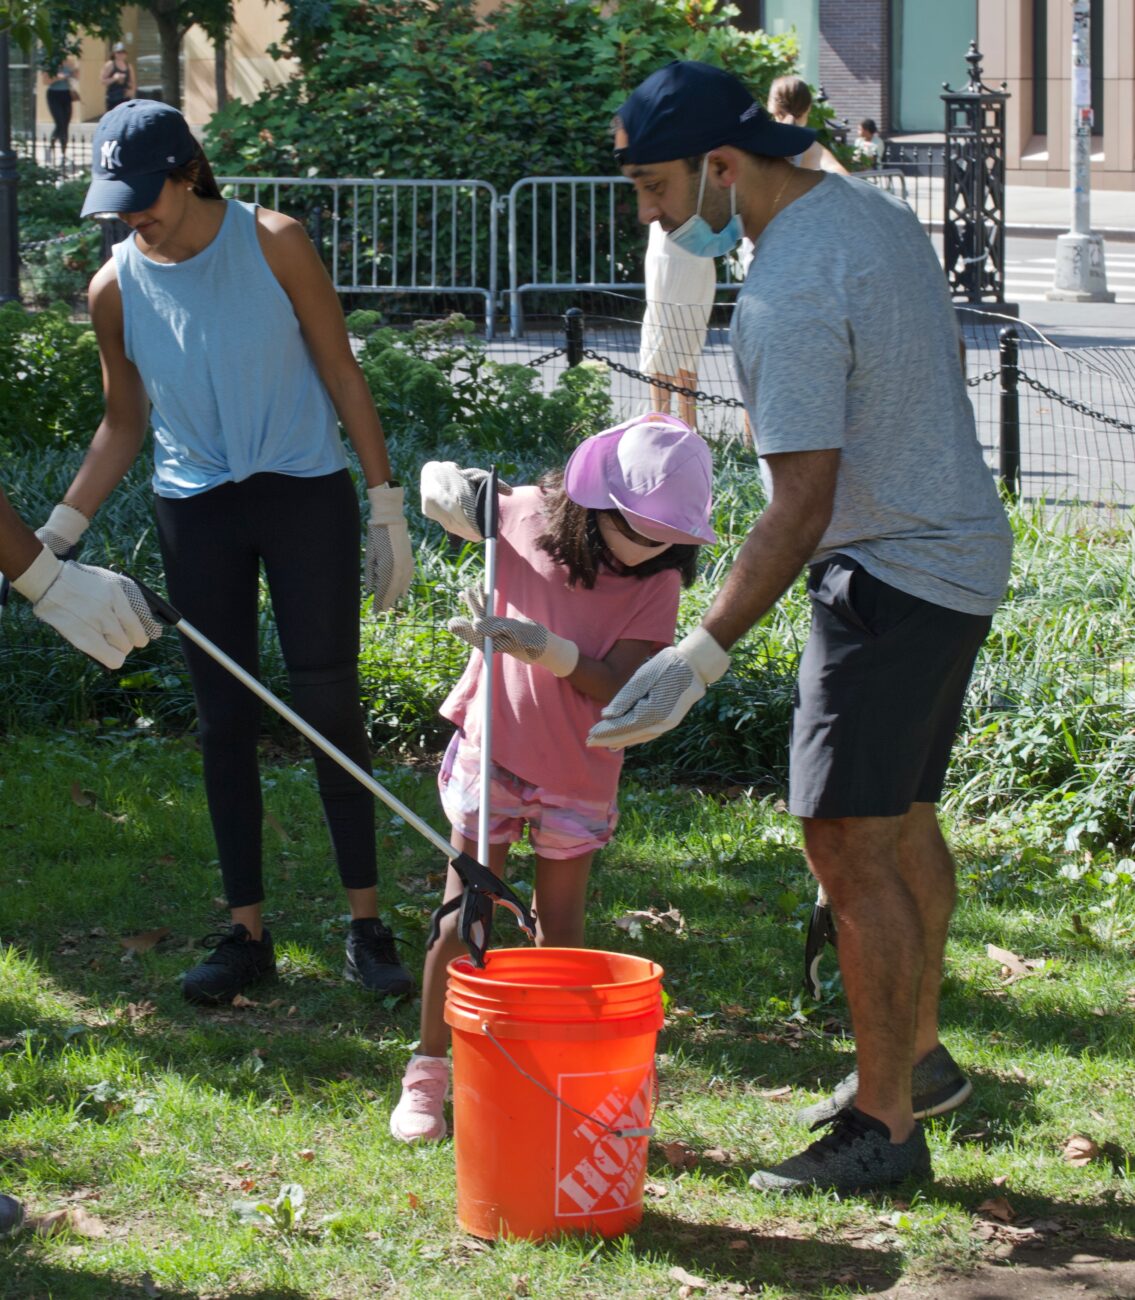 two adult volunteers and one child volunteer use tools to pick up litter in the park